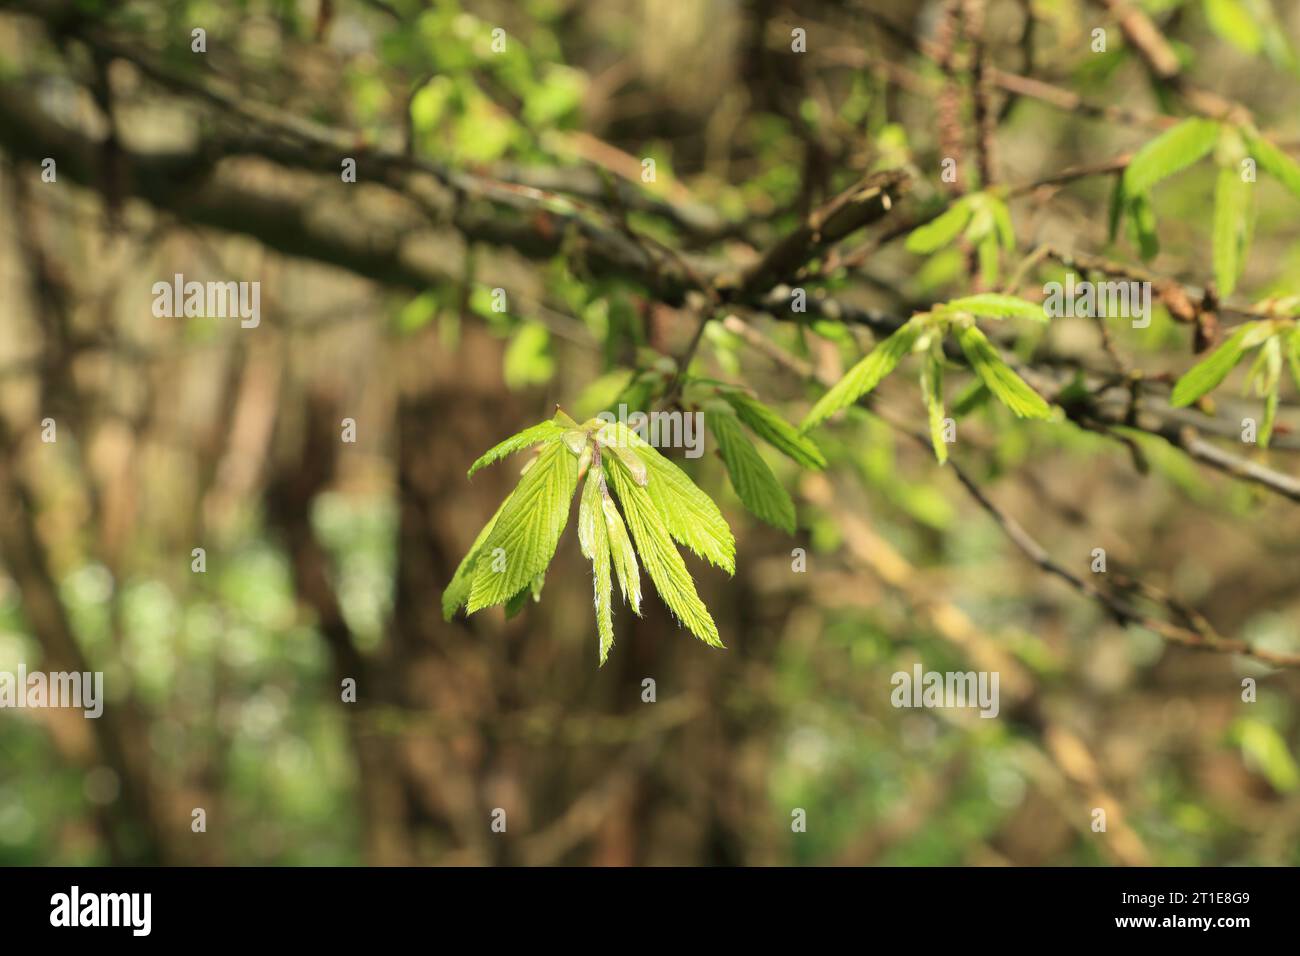 Young leaves on tree in ancient woodland at Spong Woods, Elmsted, Ashford, Kent, England, United Kingdom Stock Photo